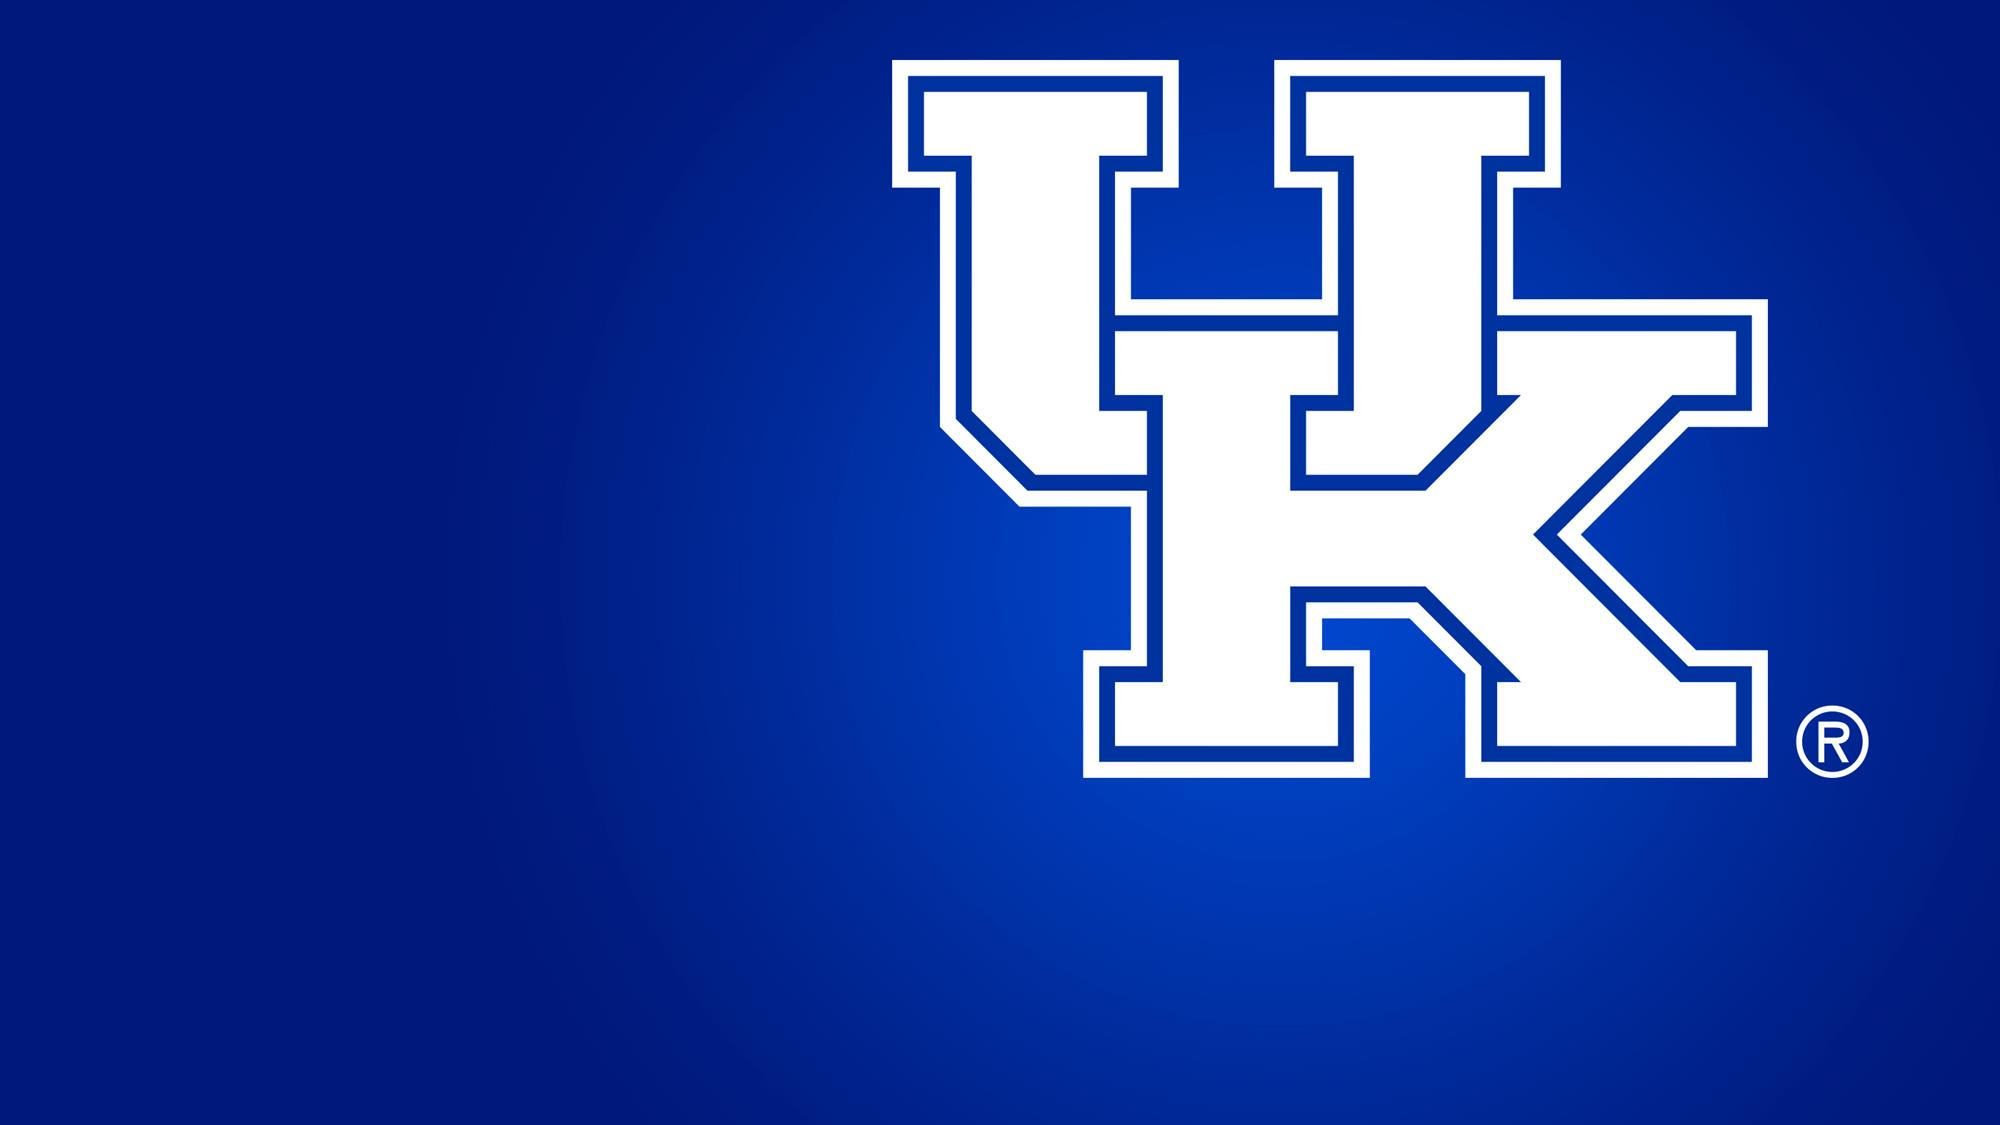 Public Invited to Attend UK Athletics Hall of Fame Dinner and Induction Ceremony